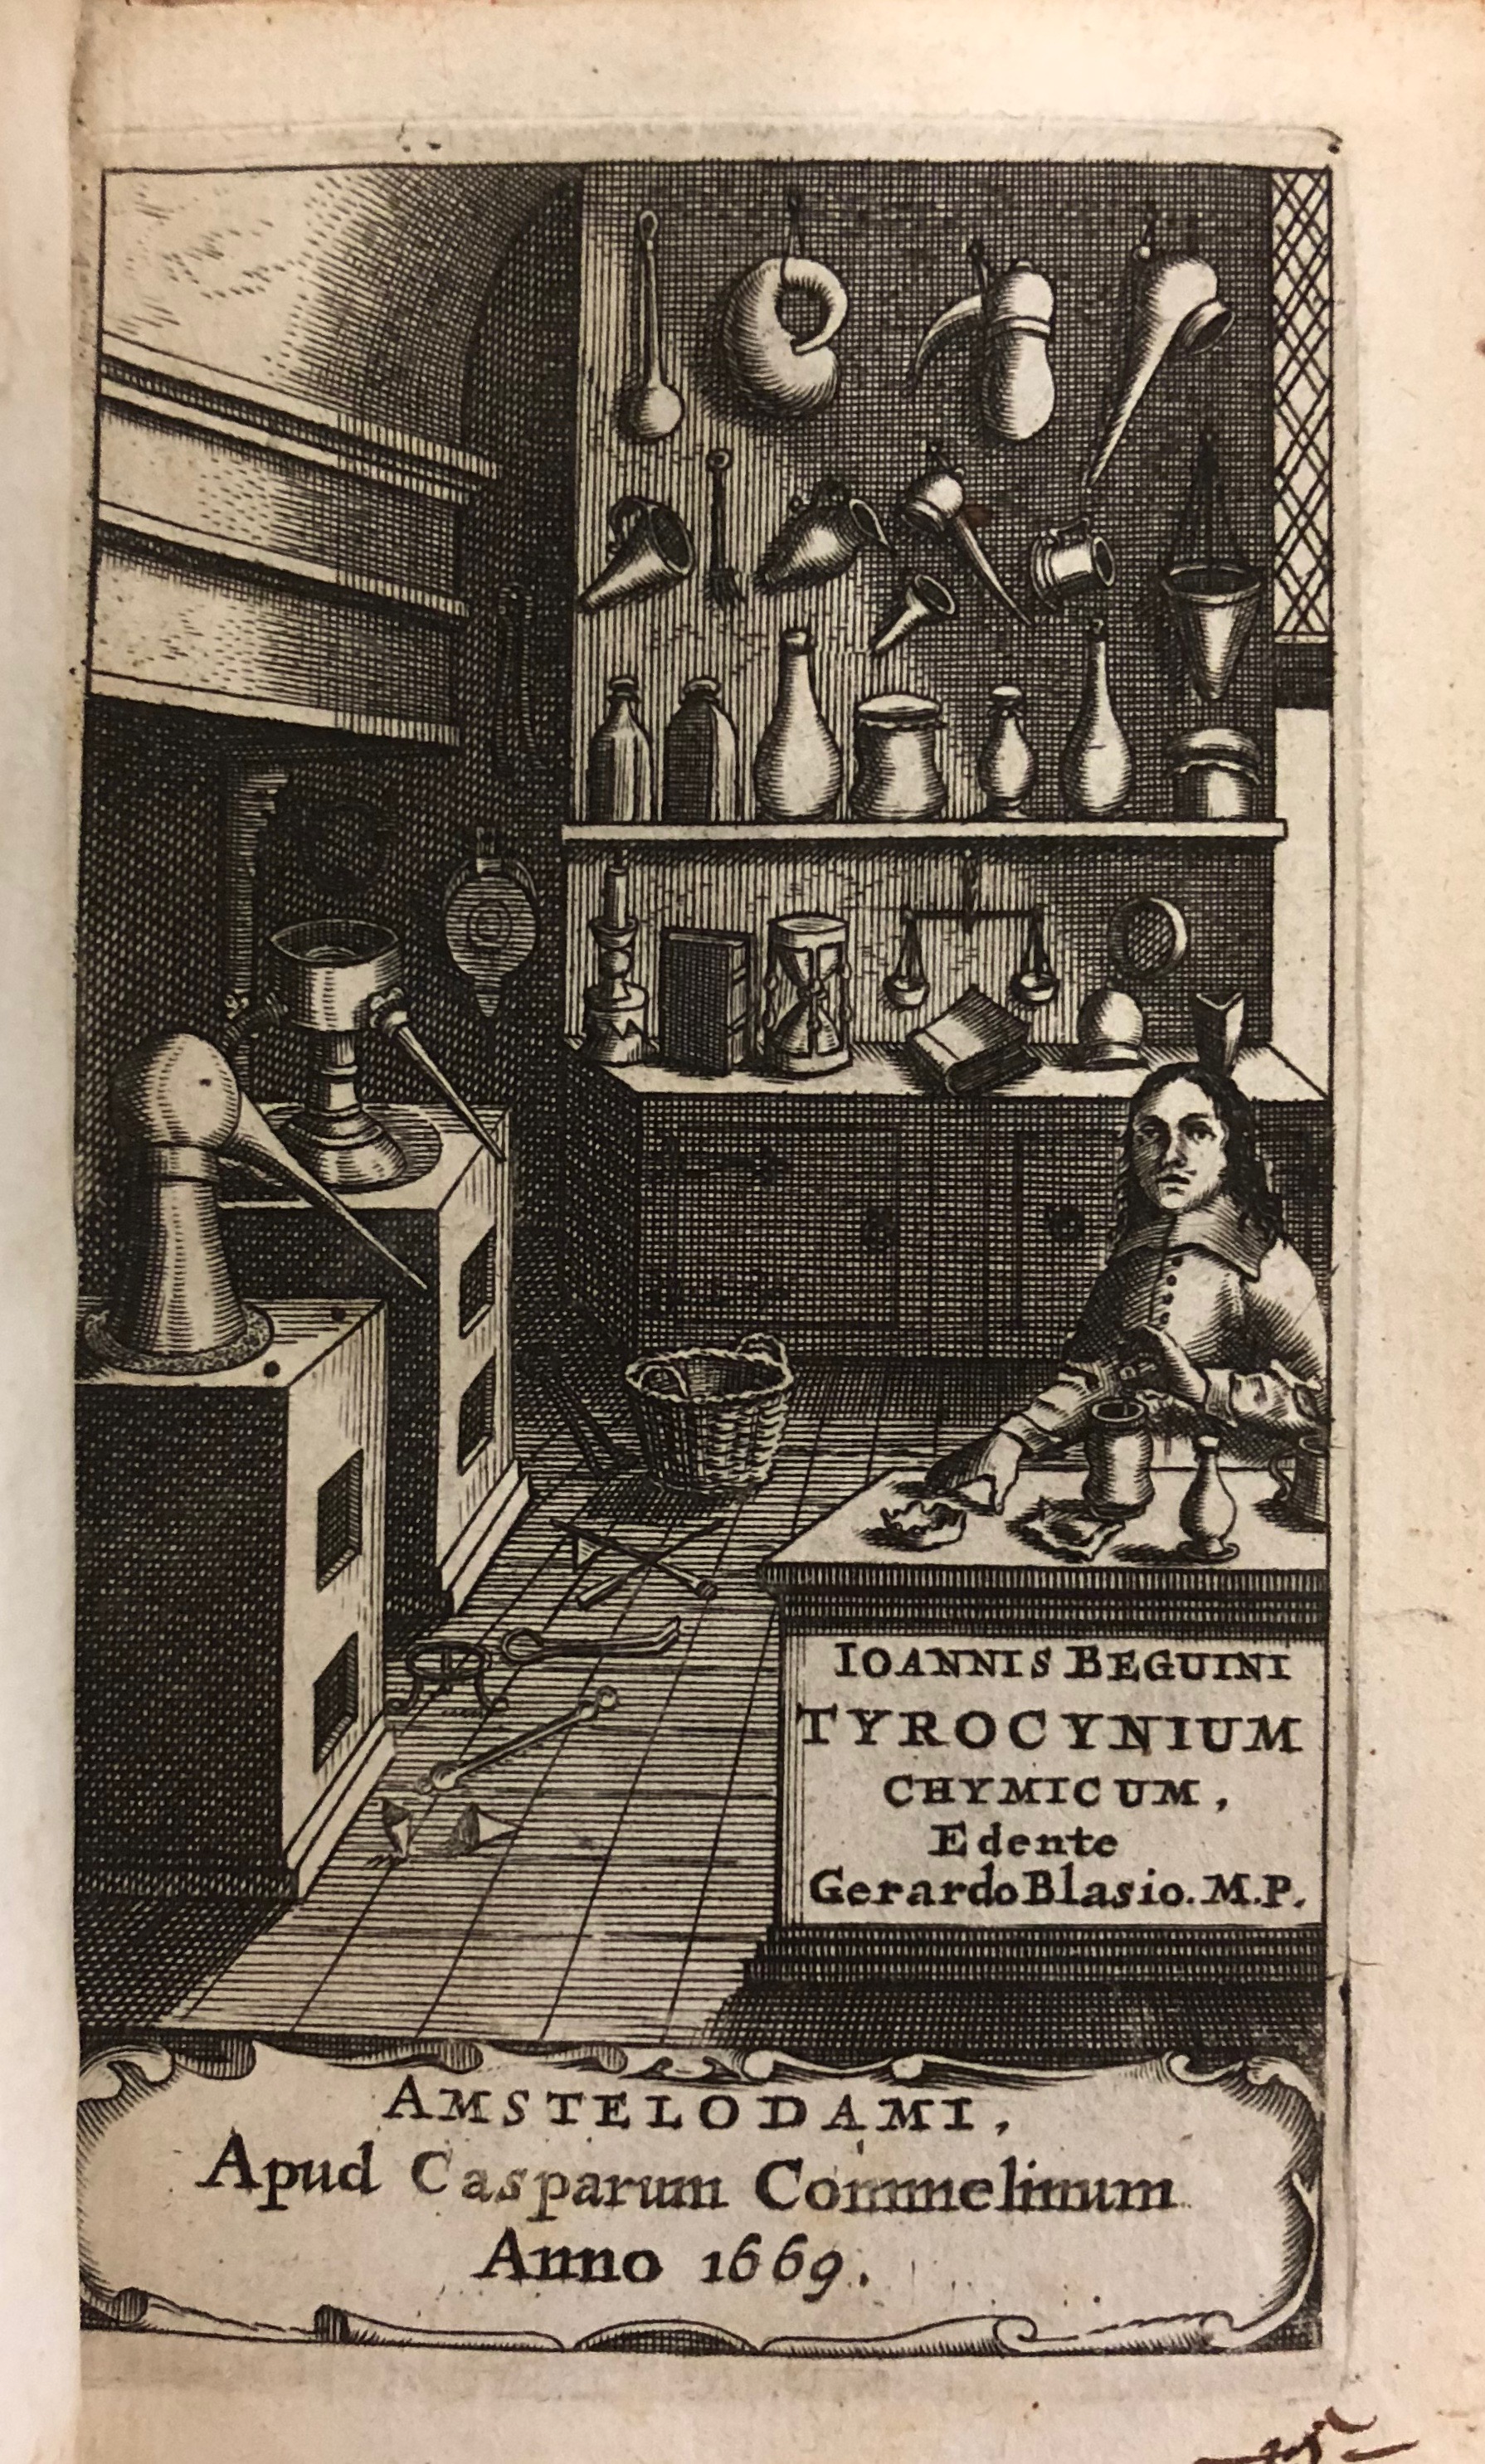 Illustration from 'Tyrocinium chymicum' by Jean Beguin, 1669, Amsterdam. (Maddison Collection 1A21, F10448000)